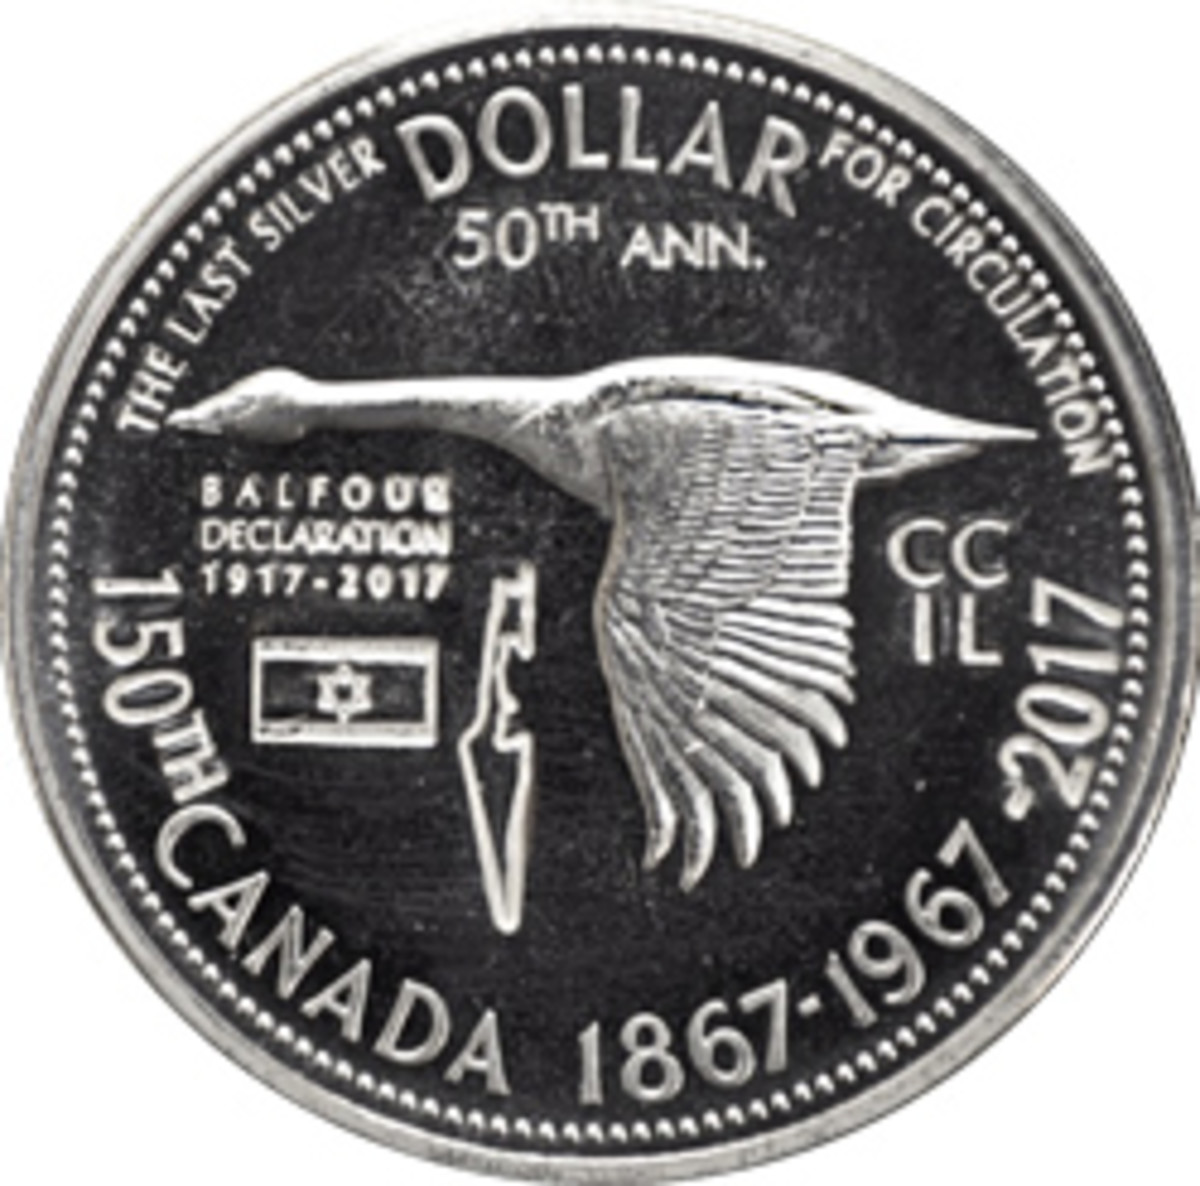  A counterstamped Canadian silver dollar issued by dealer Israel Lachovsky marks the 100th anniversary of the Balfour Declaration.